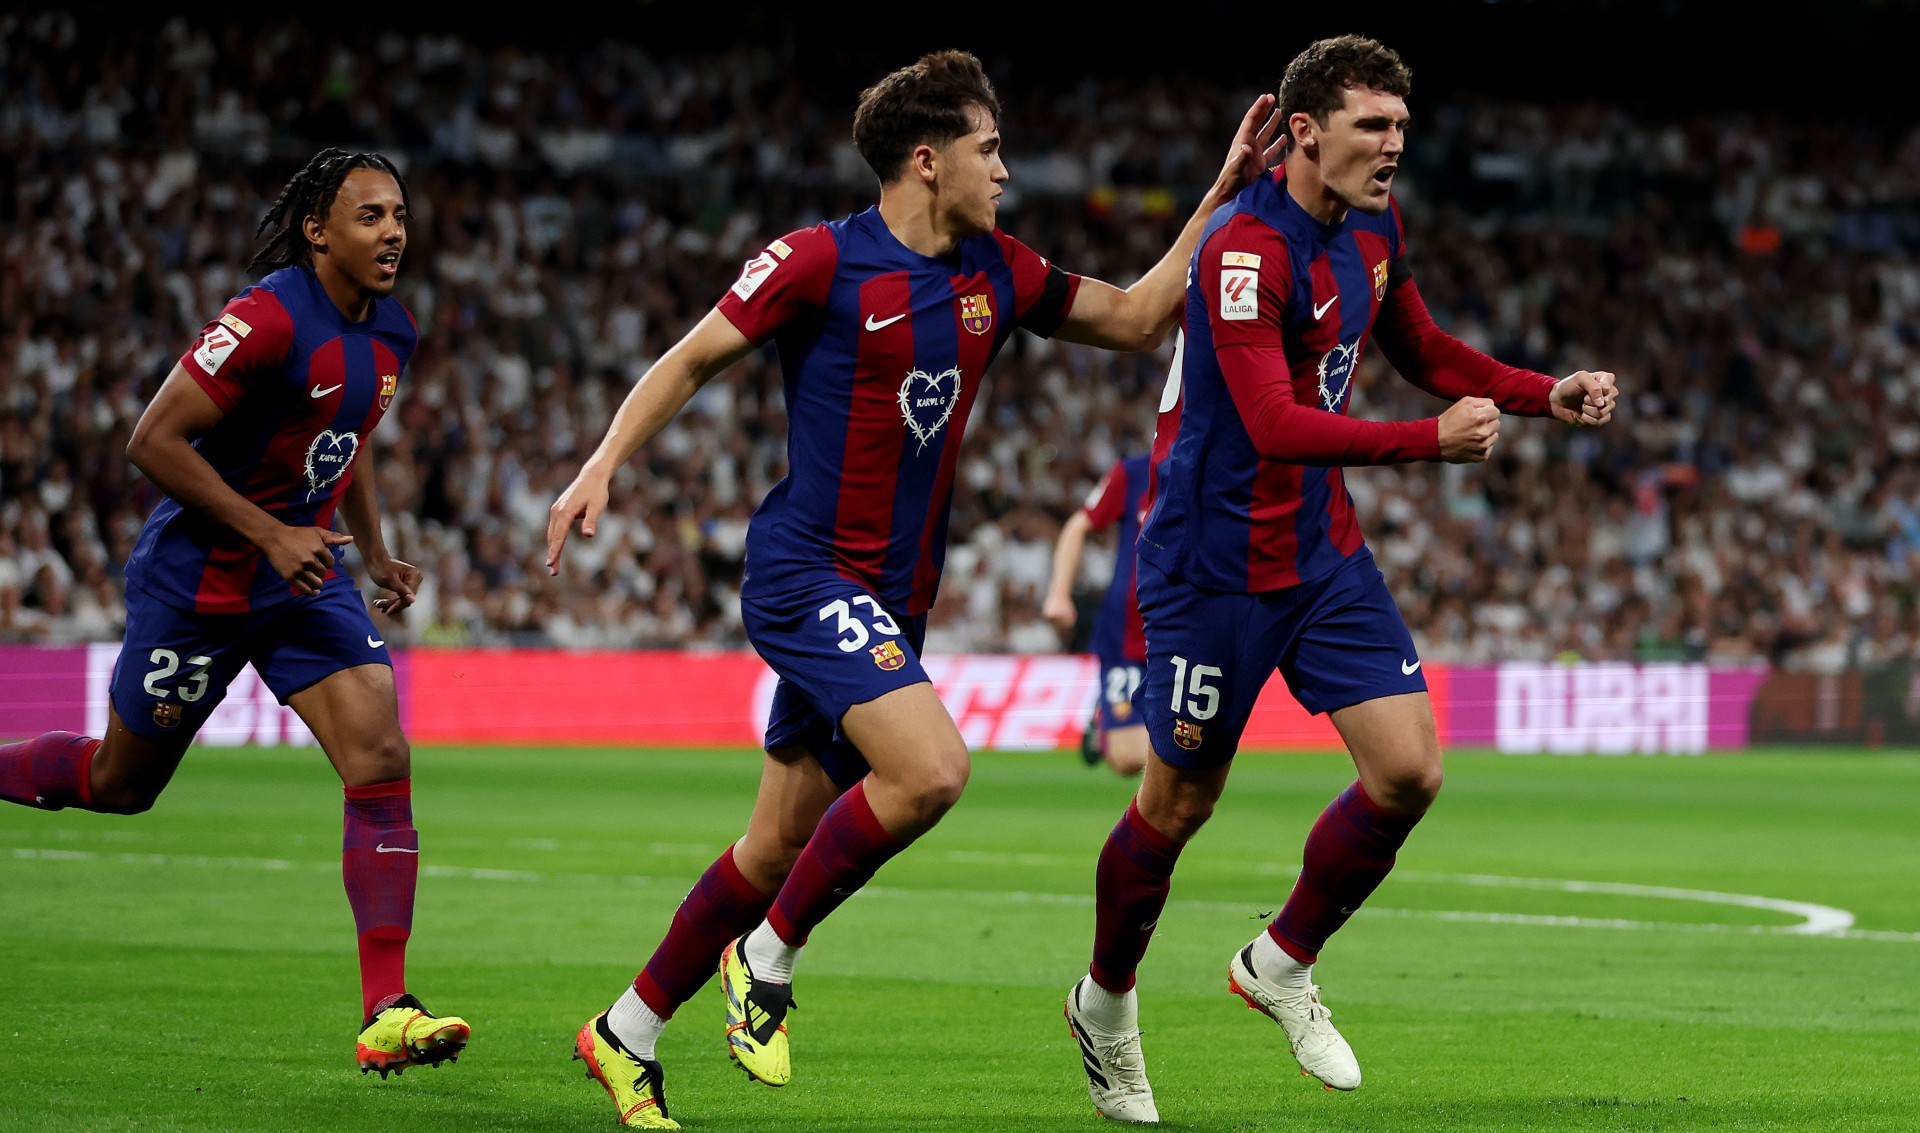 (WATCH) Barcelona storm into El Clasico lead at Real Madrid